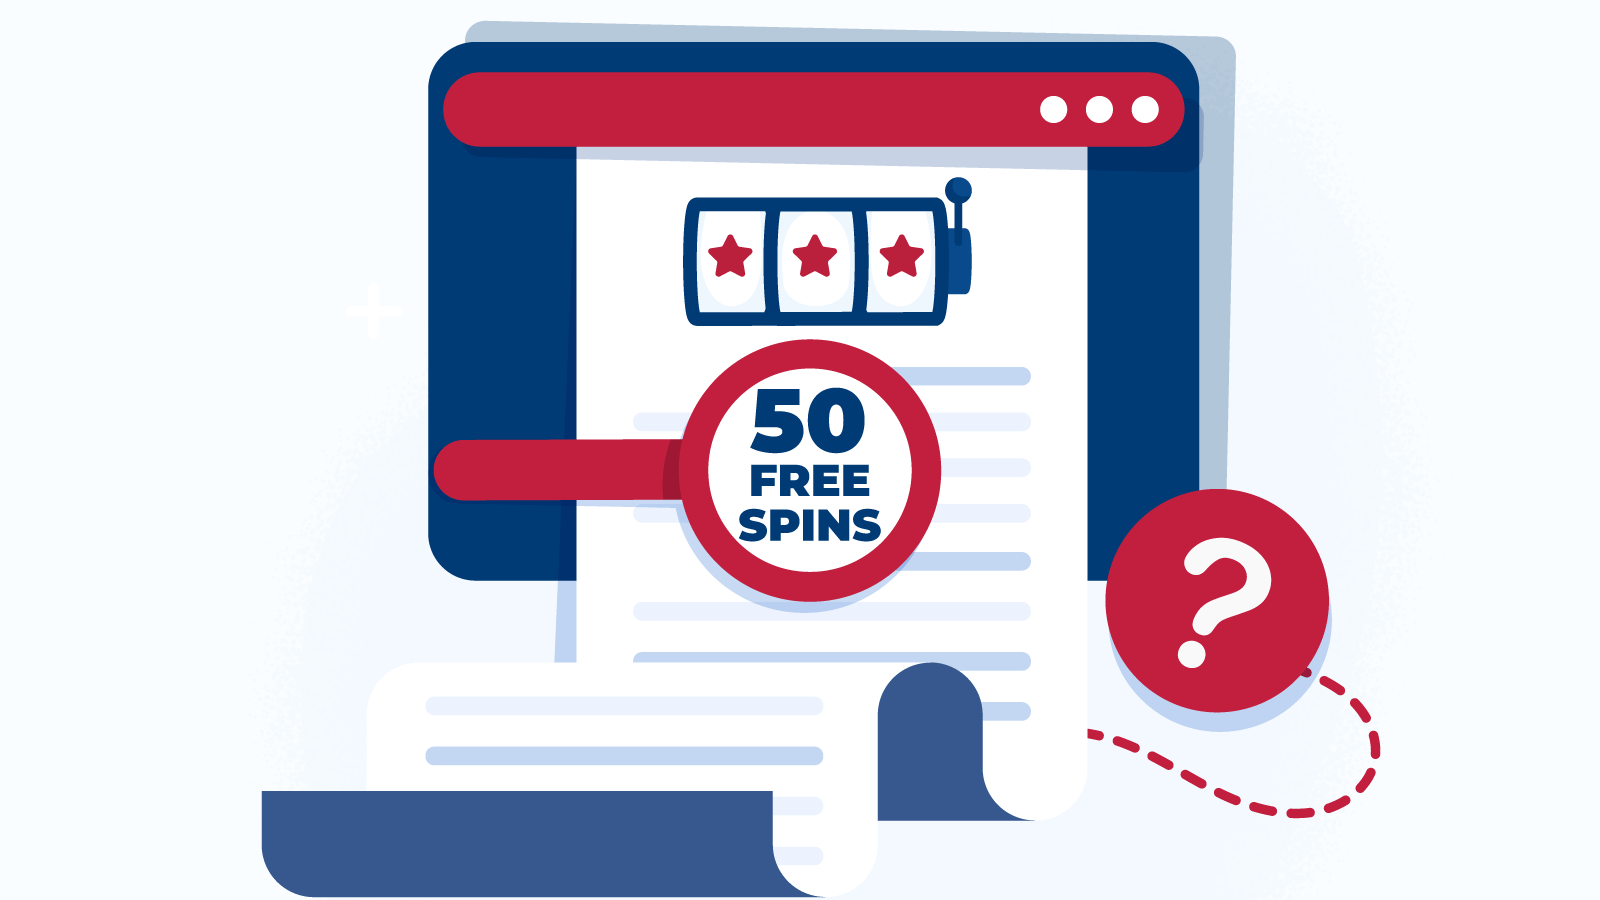 About 50 free spins no deposit in Canada